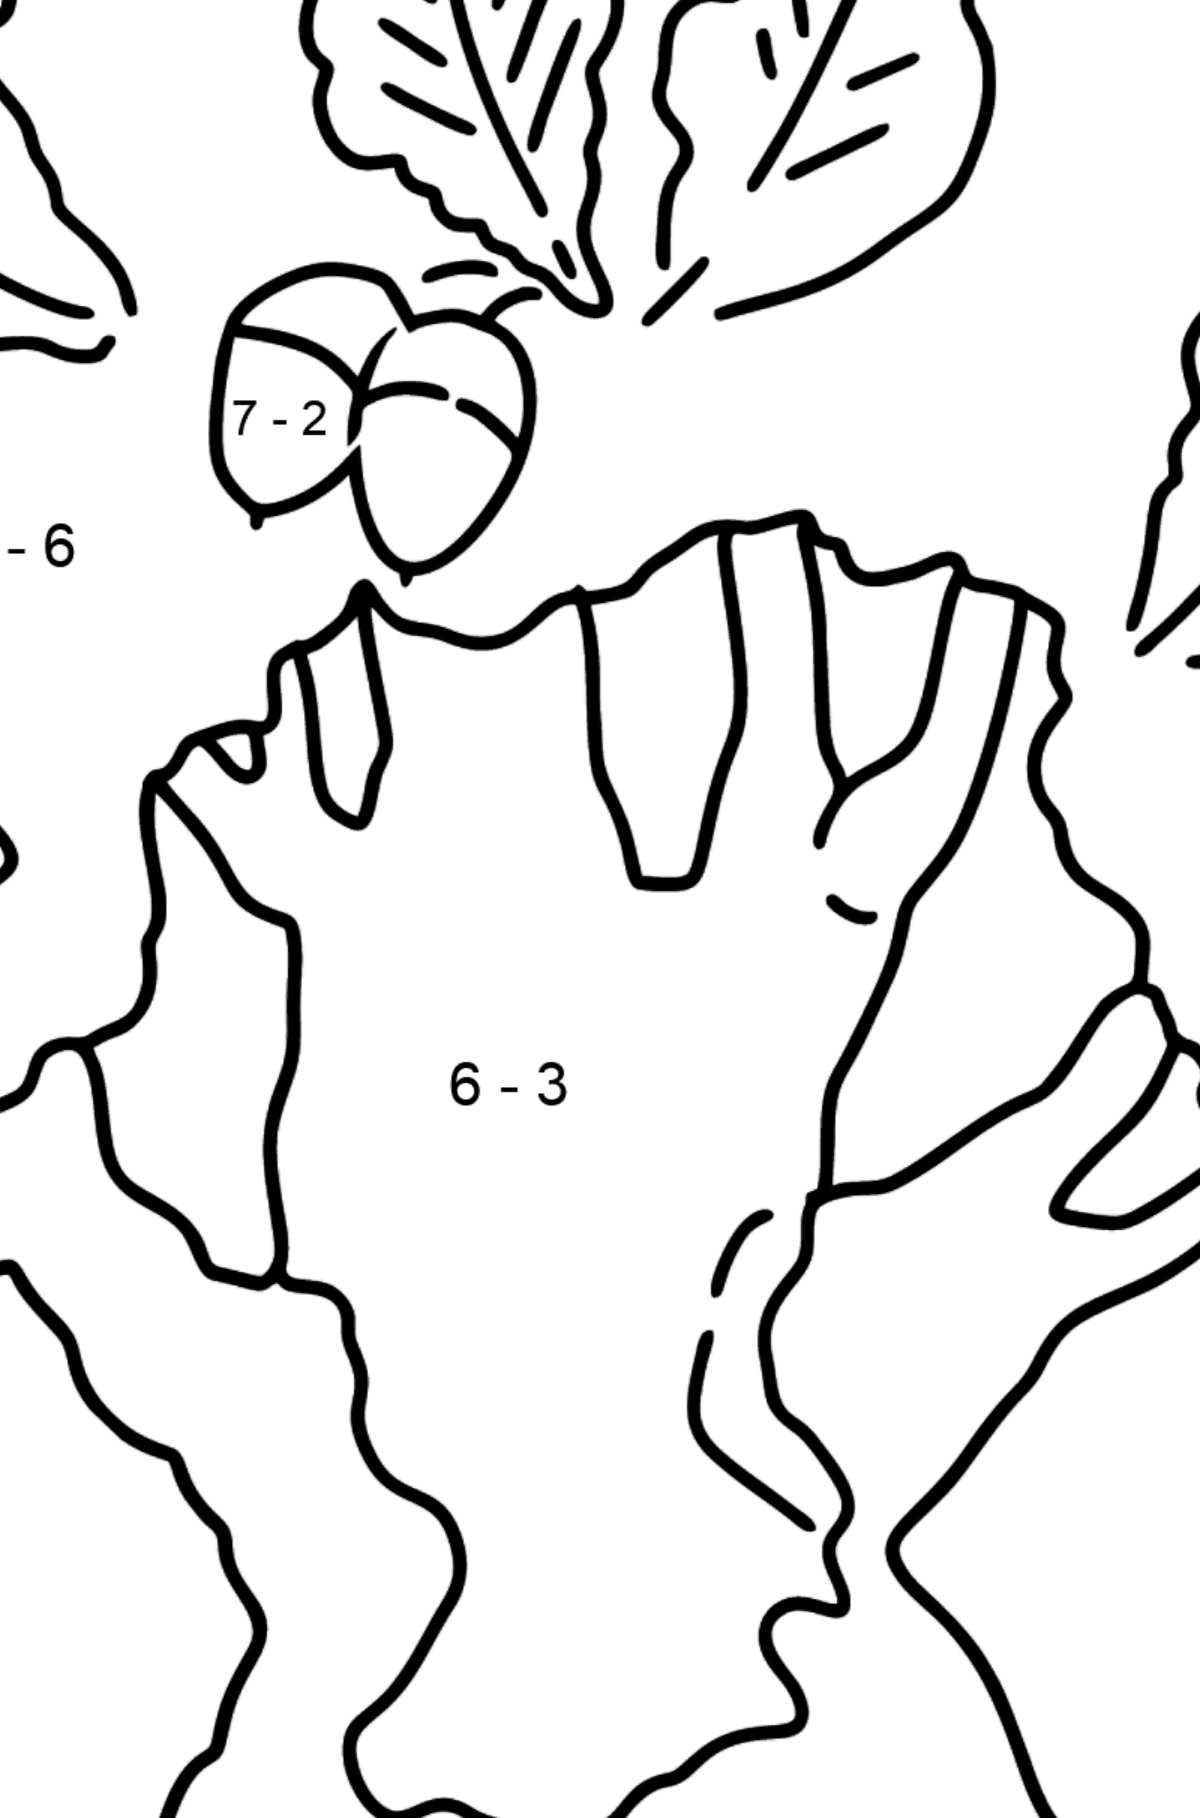 Oak coloring page - Math Coloring - Subtraction for Kids